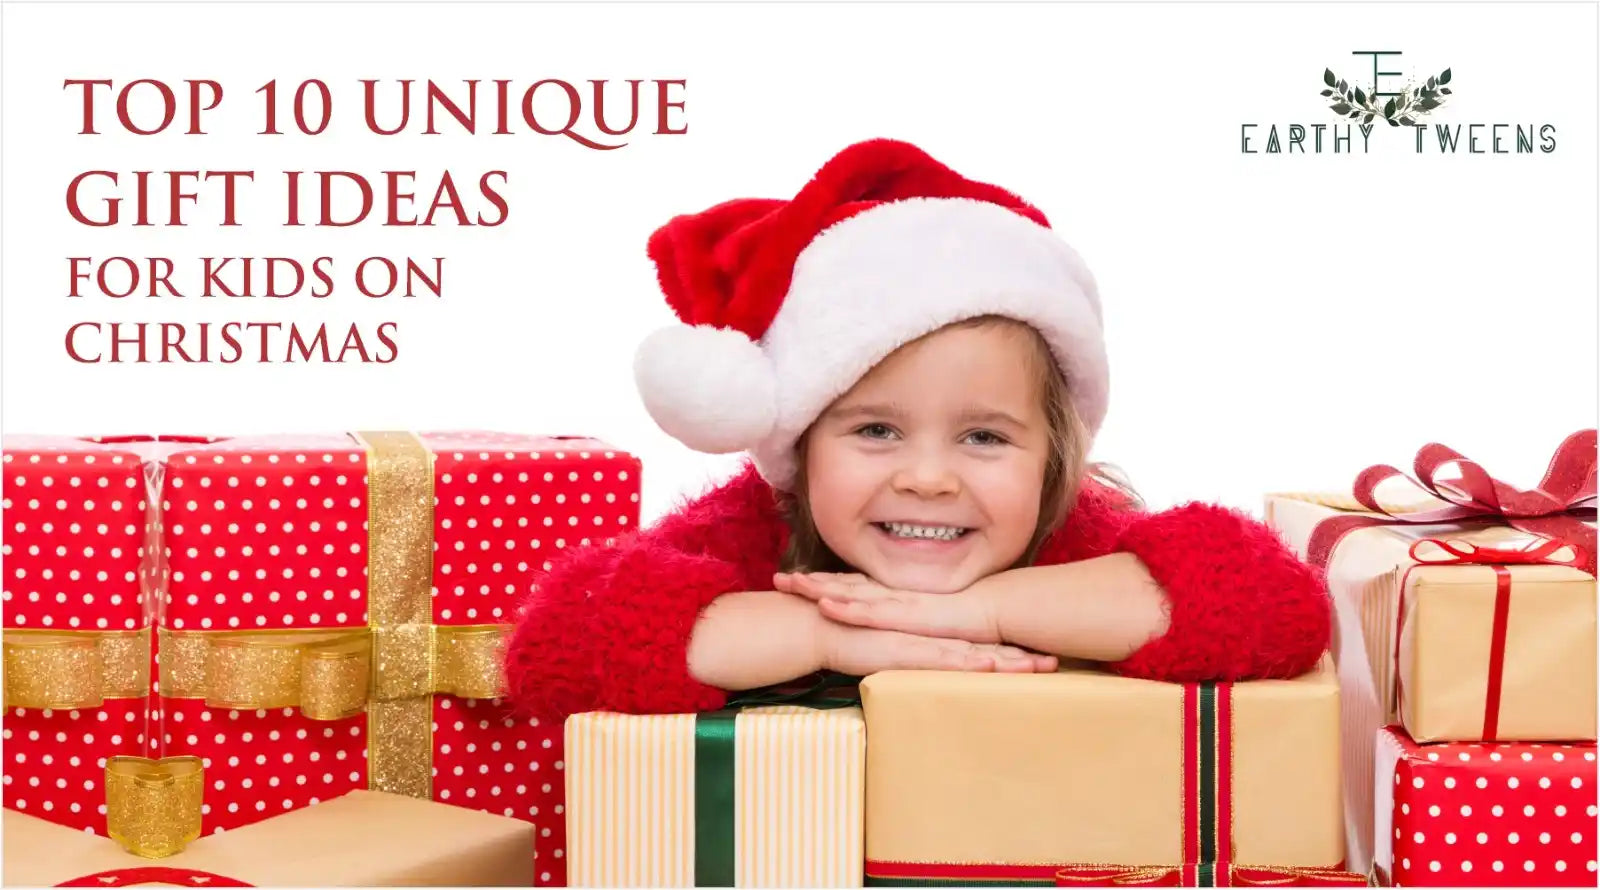 TOP 10 UNIQUE GIFT IDEAS FOR KIDS ON CHRISTMAS